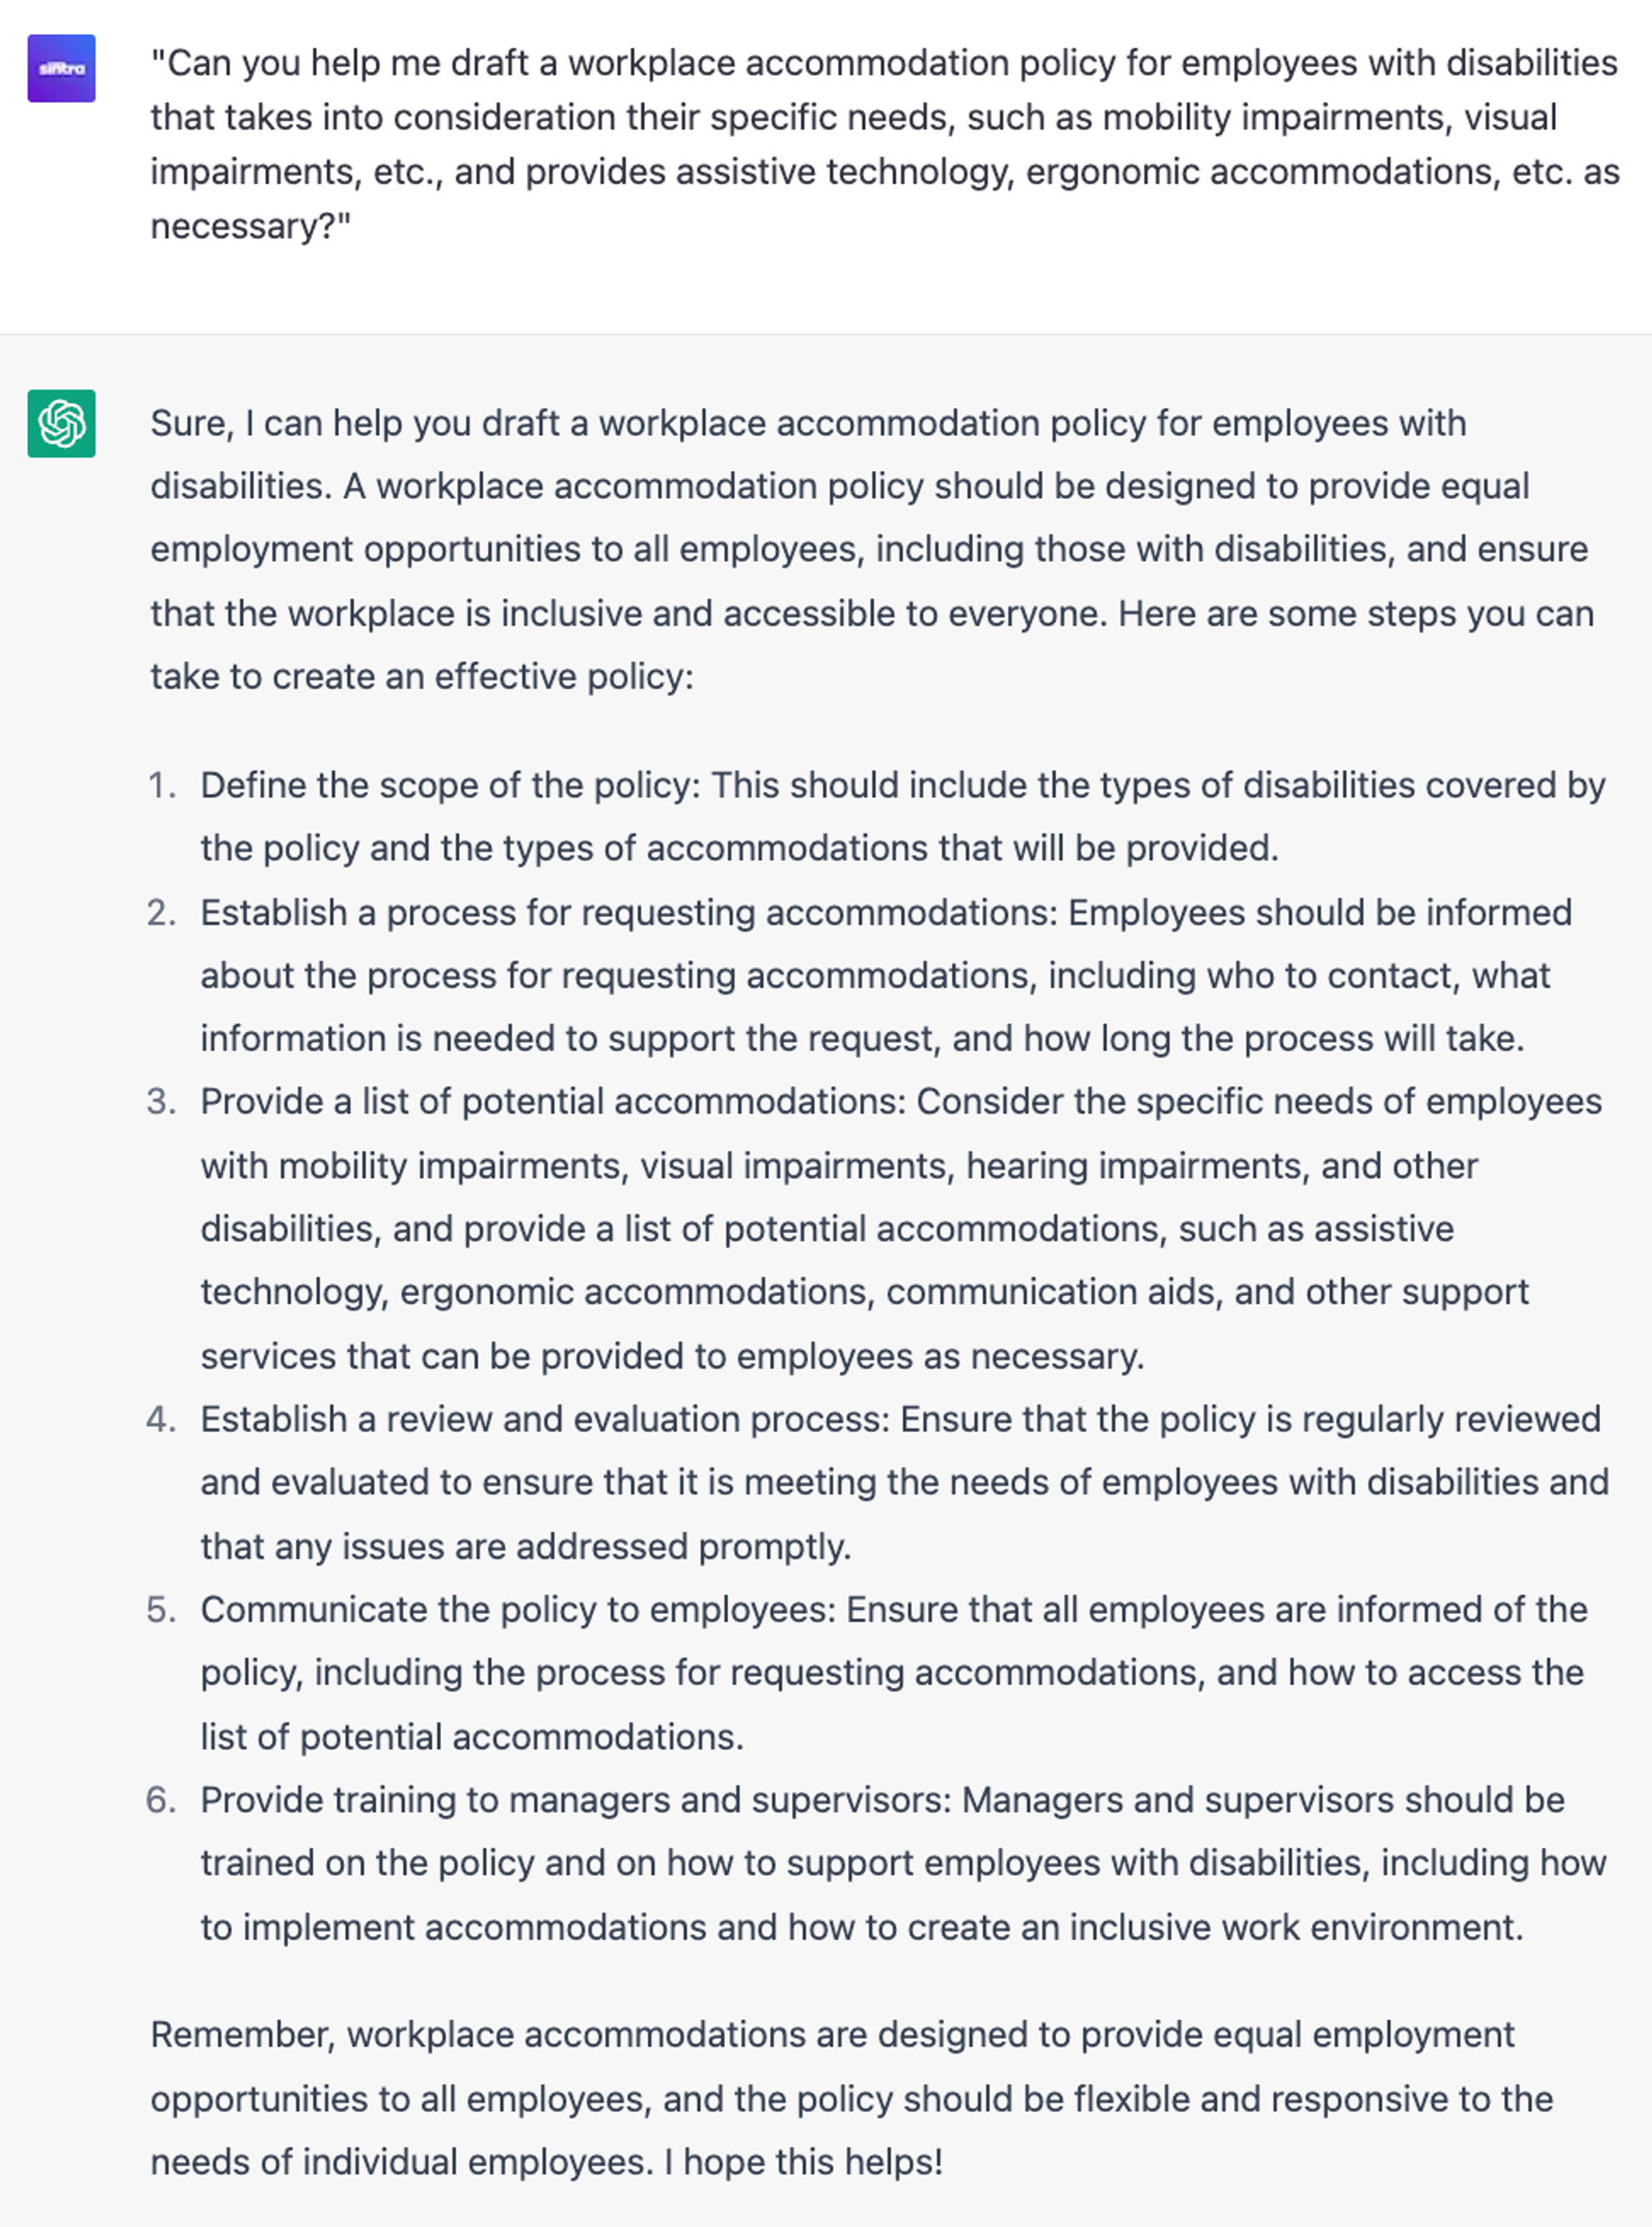  6 Strategic ChatGPT Prompts: Writing workplace accommodation policies